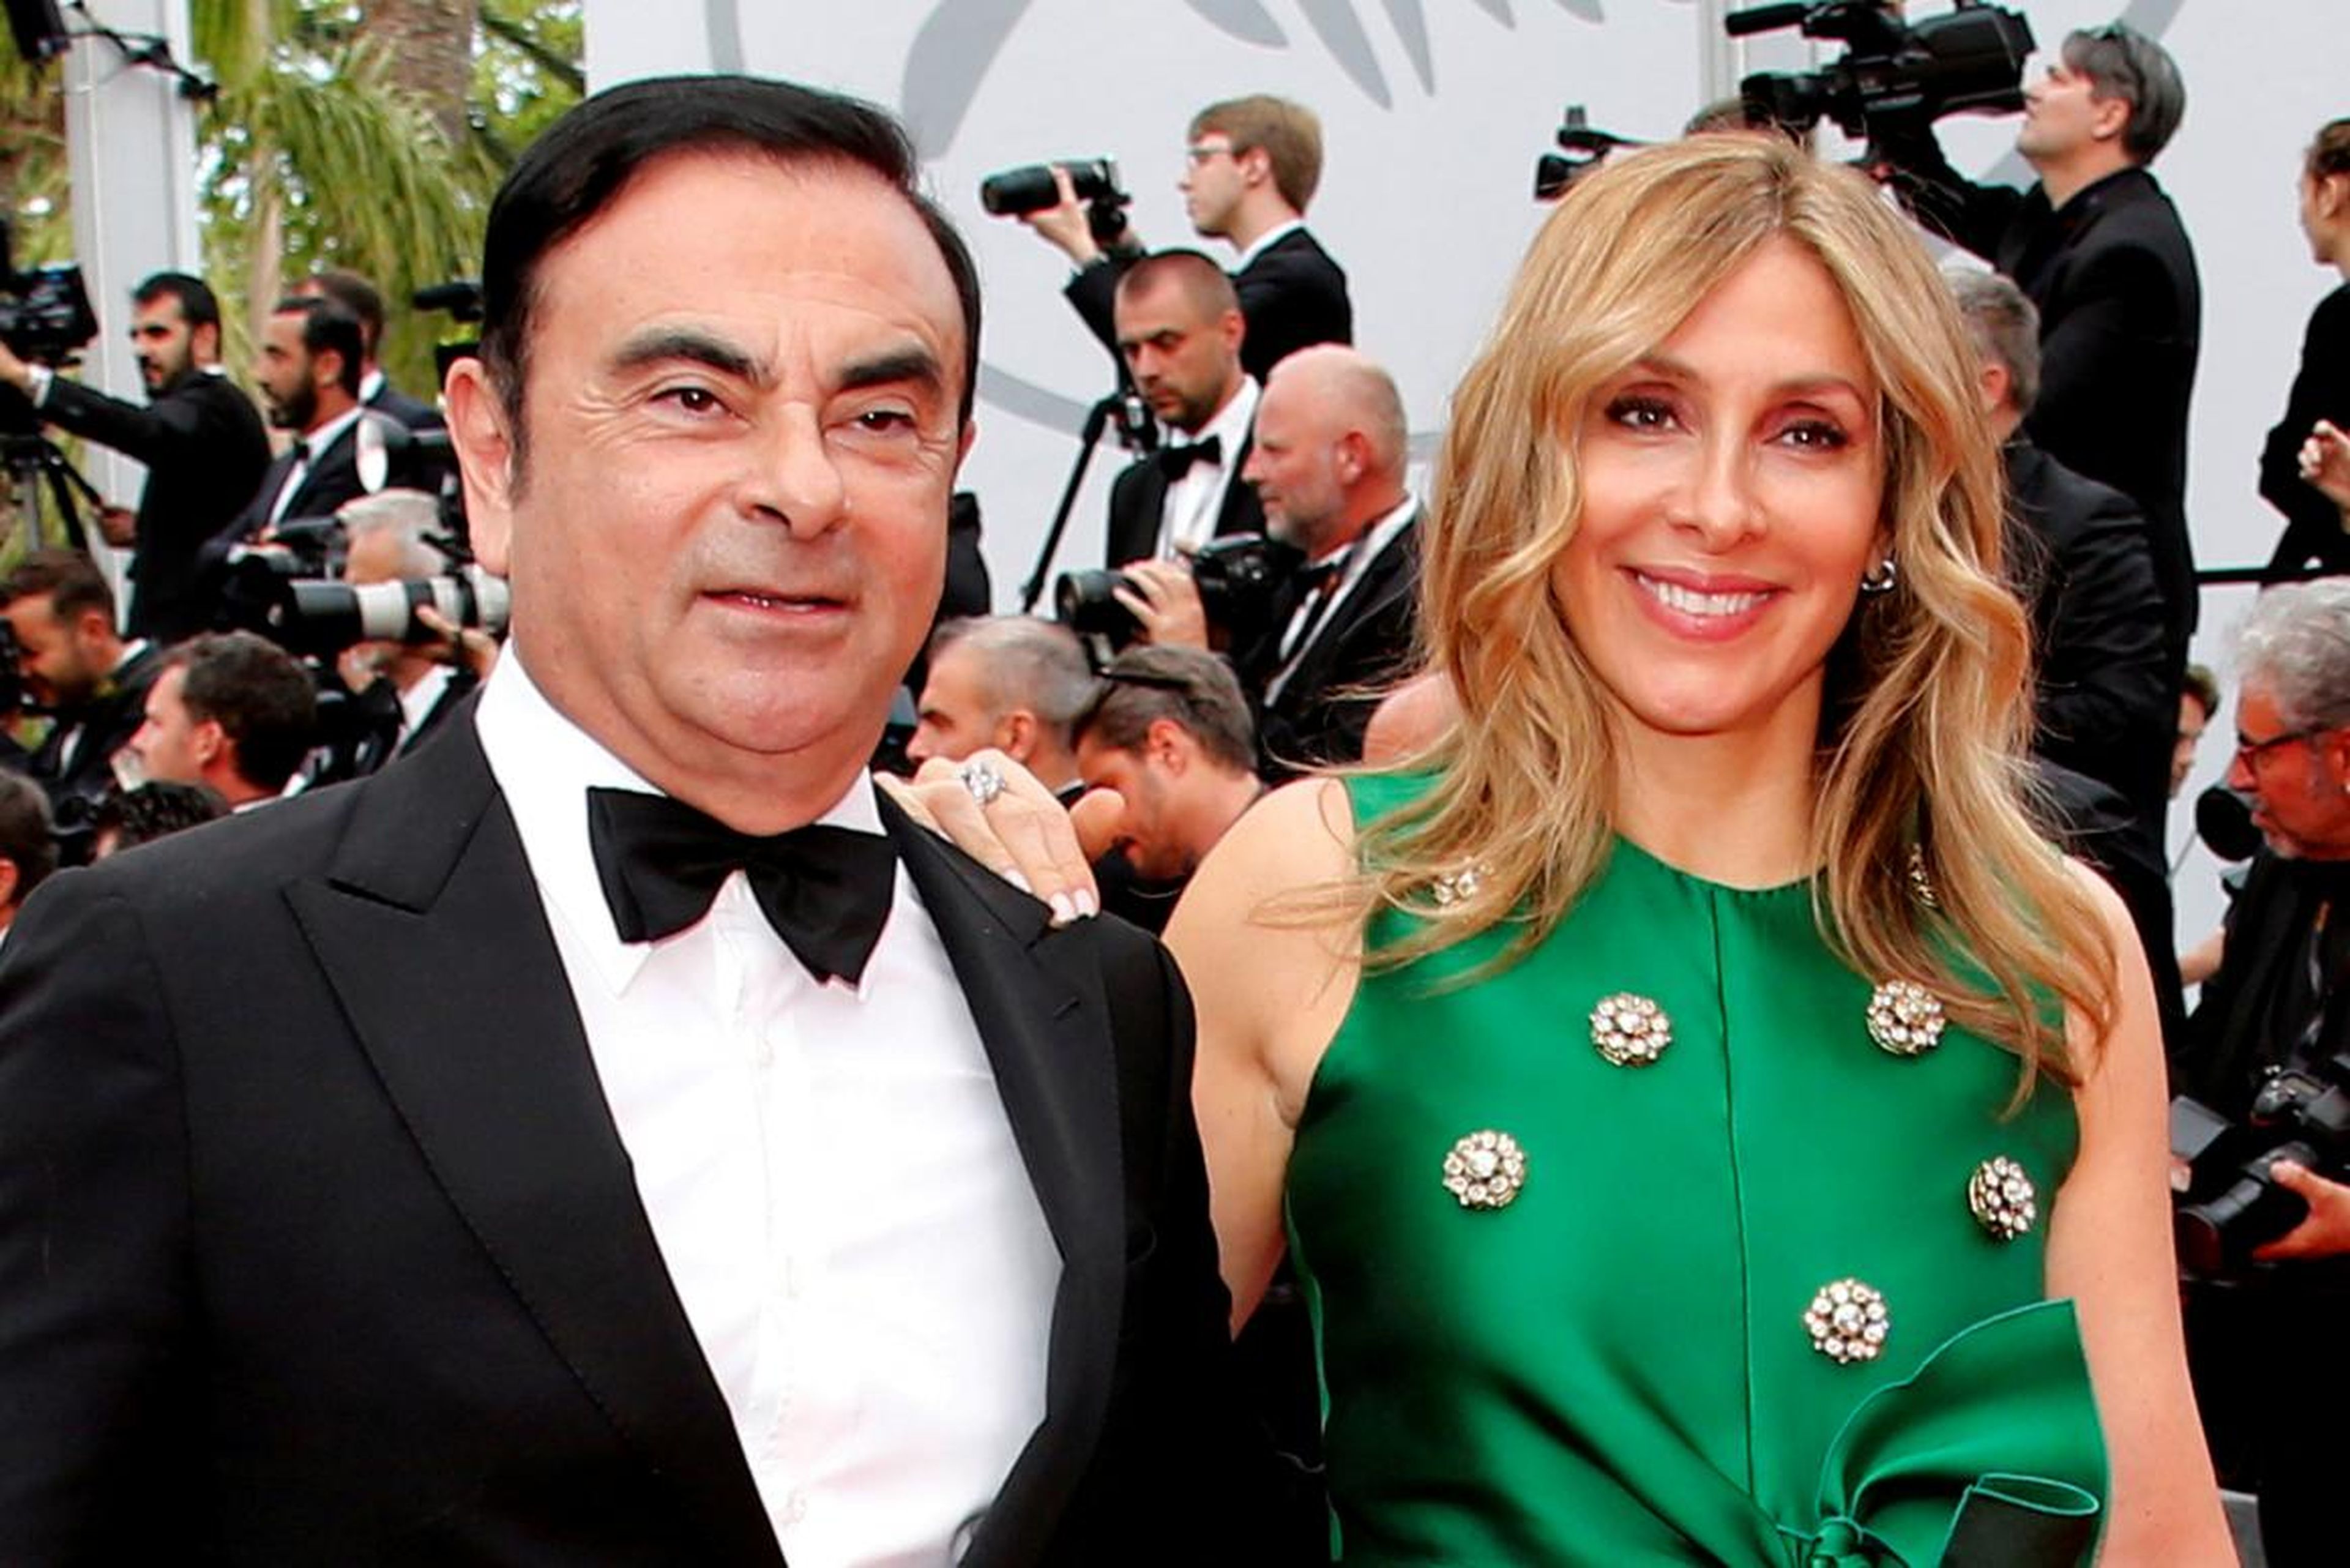 Carlos Ghosn, Chairman and CEO of the Renault-Nissan Alliance, and his wife Carole pose. Picture taken May 26, 2017.